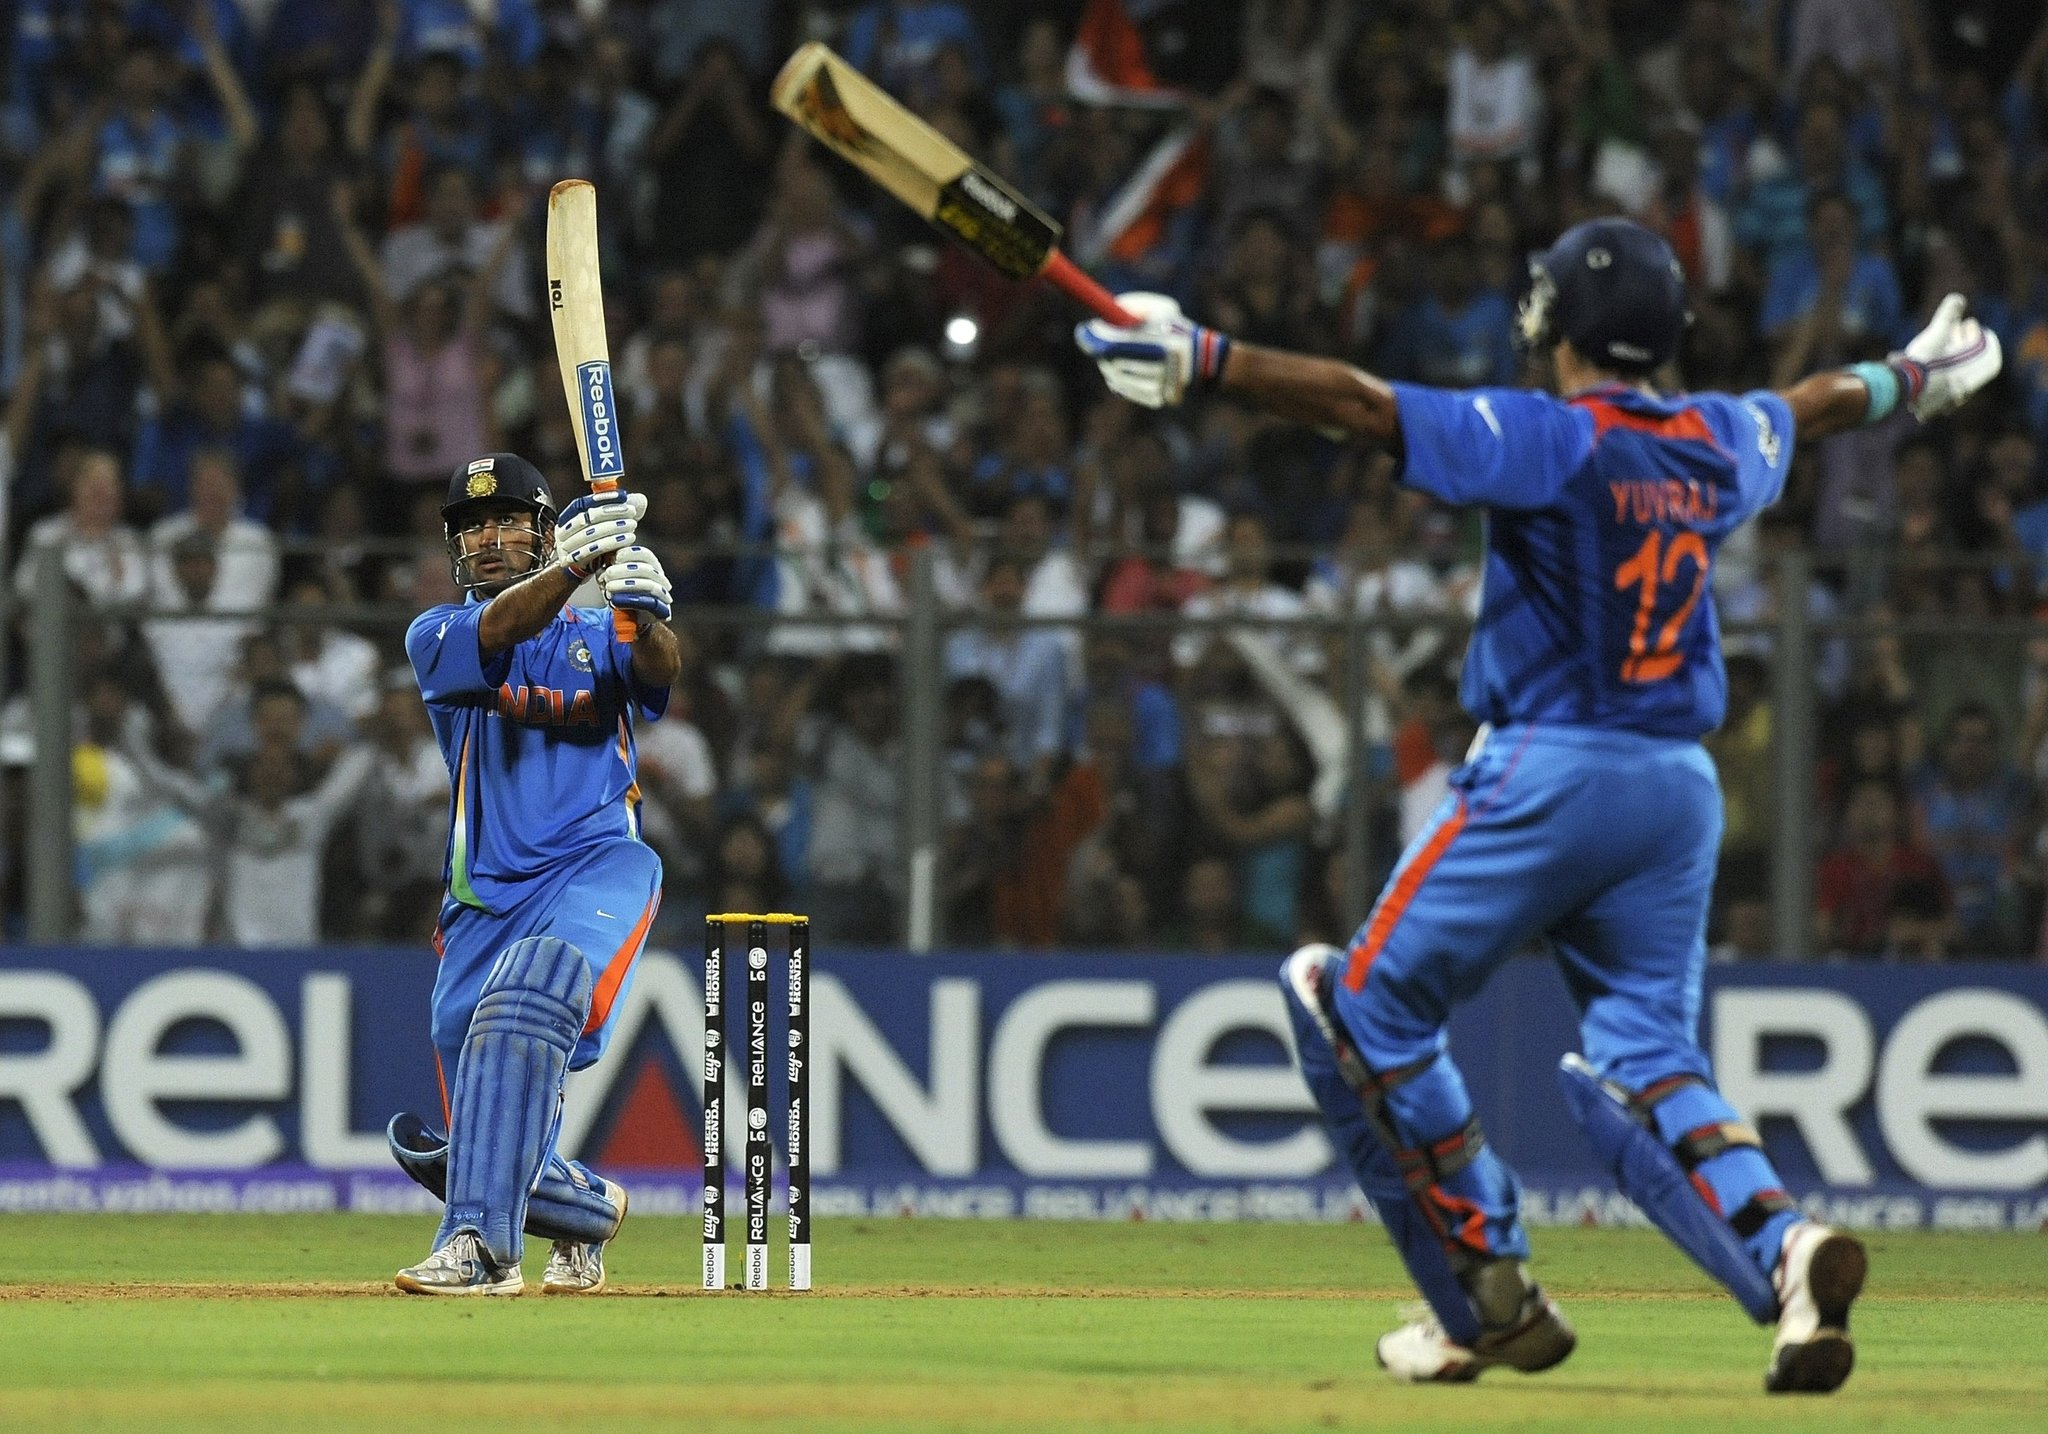 Indian cricket will have to get used to fact that Dhoni won’t be playing forever: Sourav Ganguly